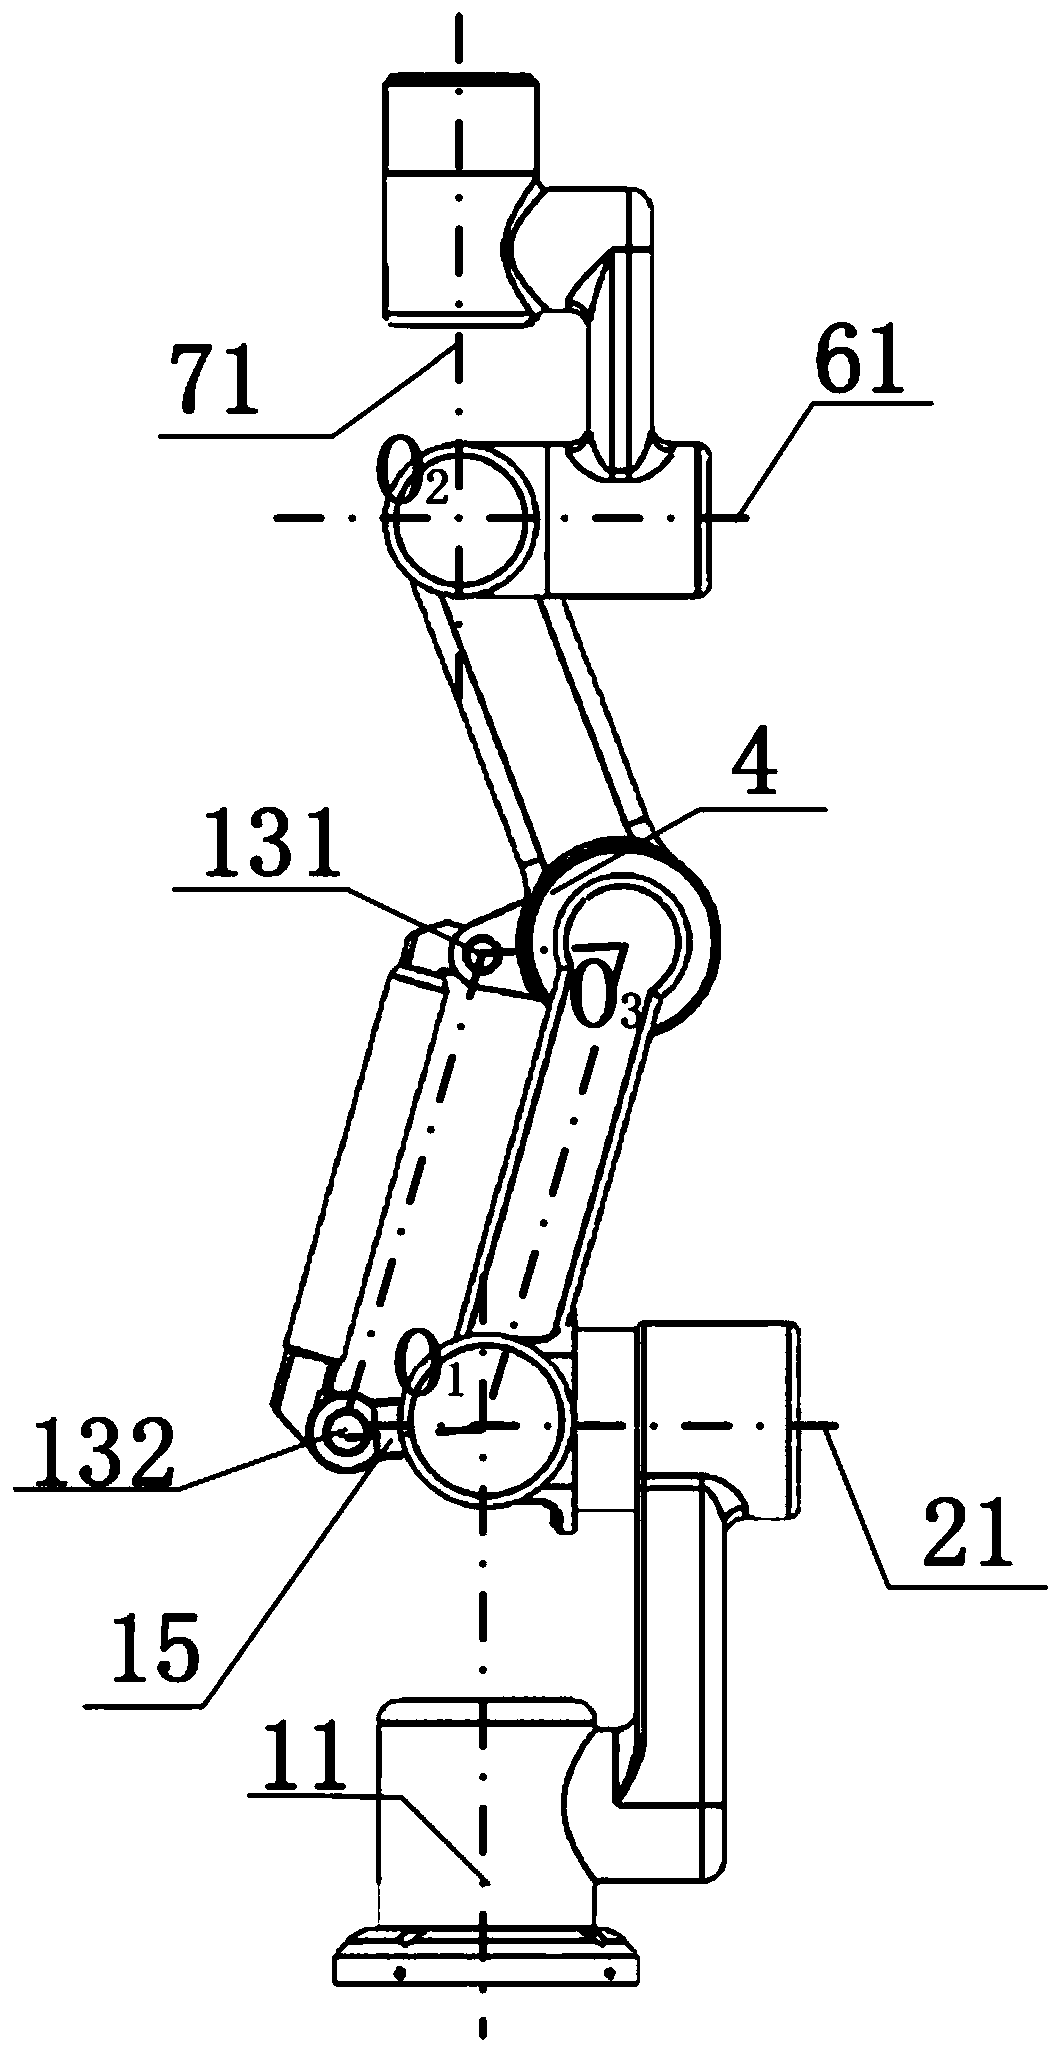 Seven-degree-of-freedom series-parallel hybrid mechanical arm and robot